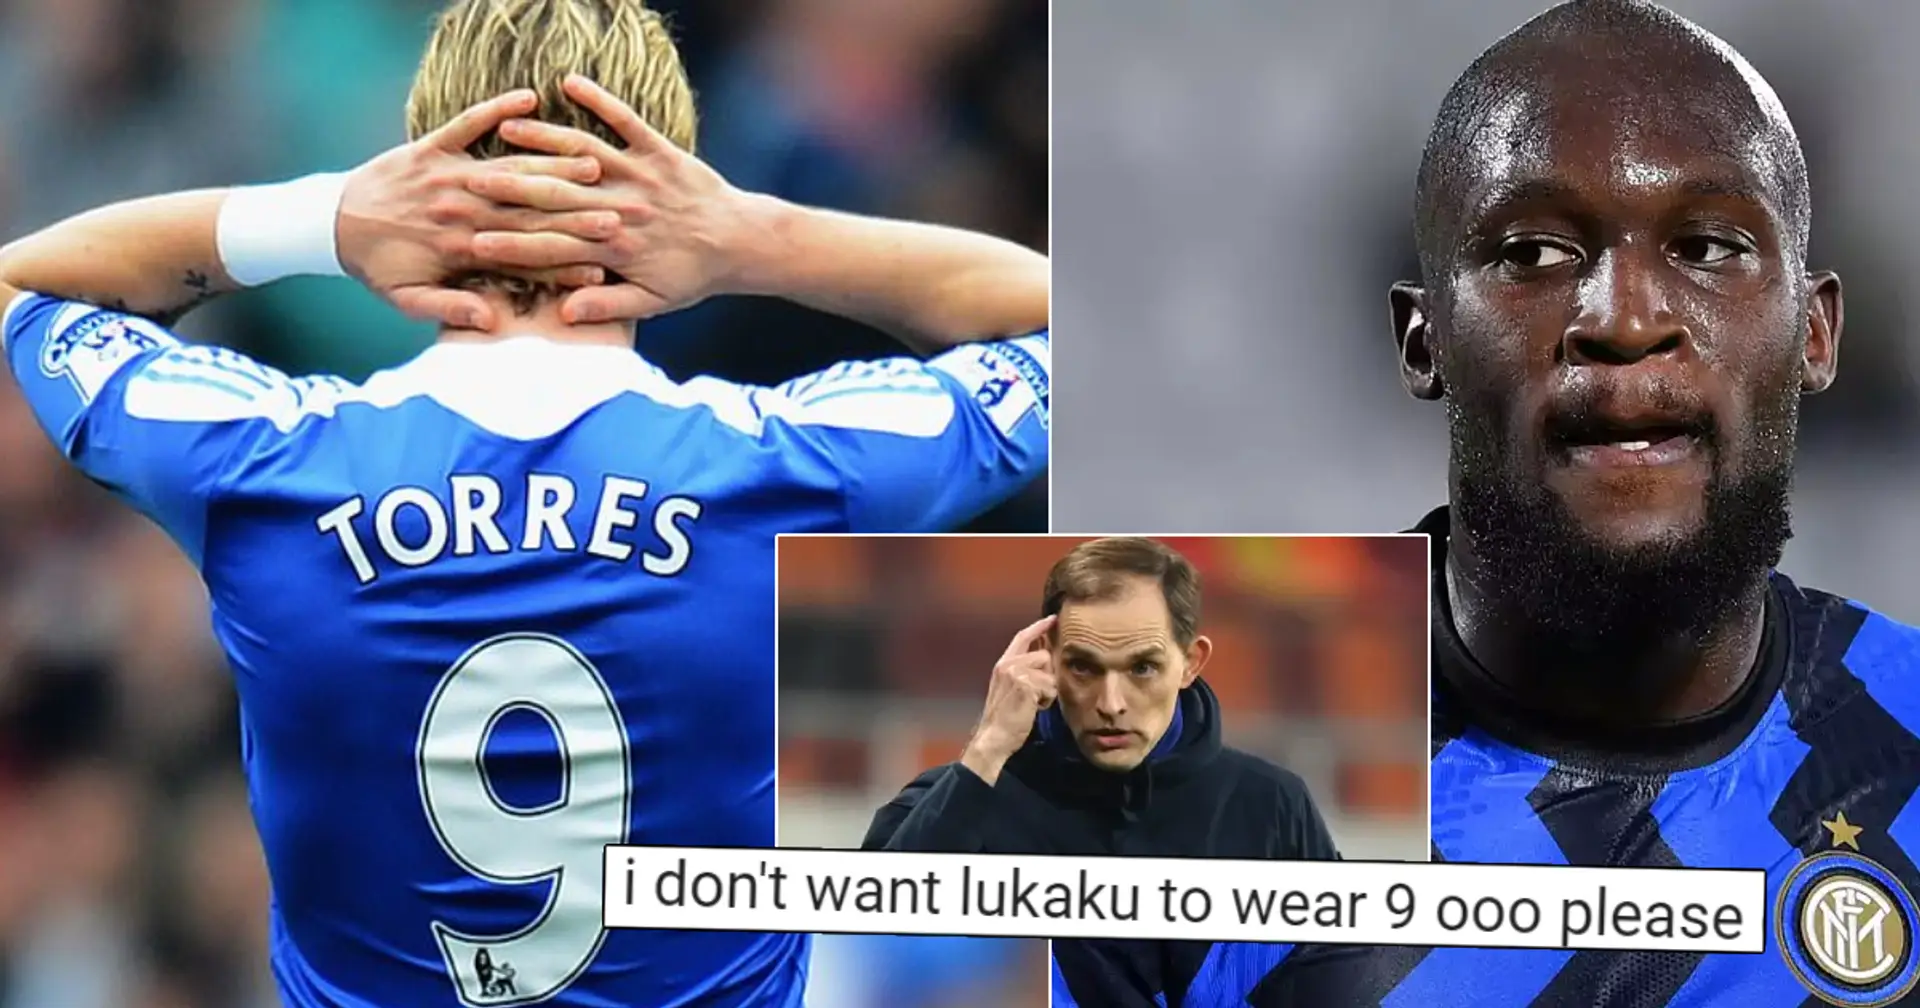 '18 will be better'; 'I prefer 39 for him': Tribuna's CFC community weighs in on Lukaku's potential shirt number